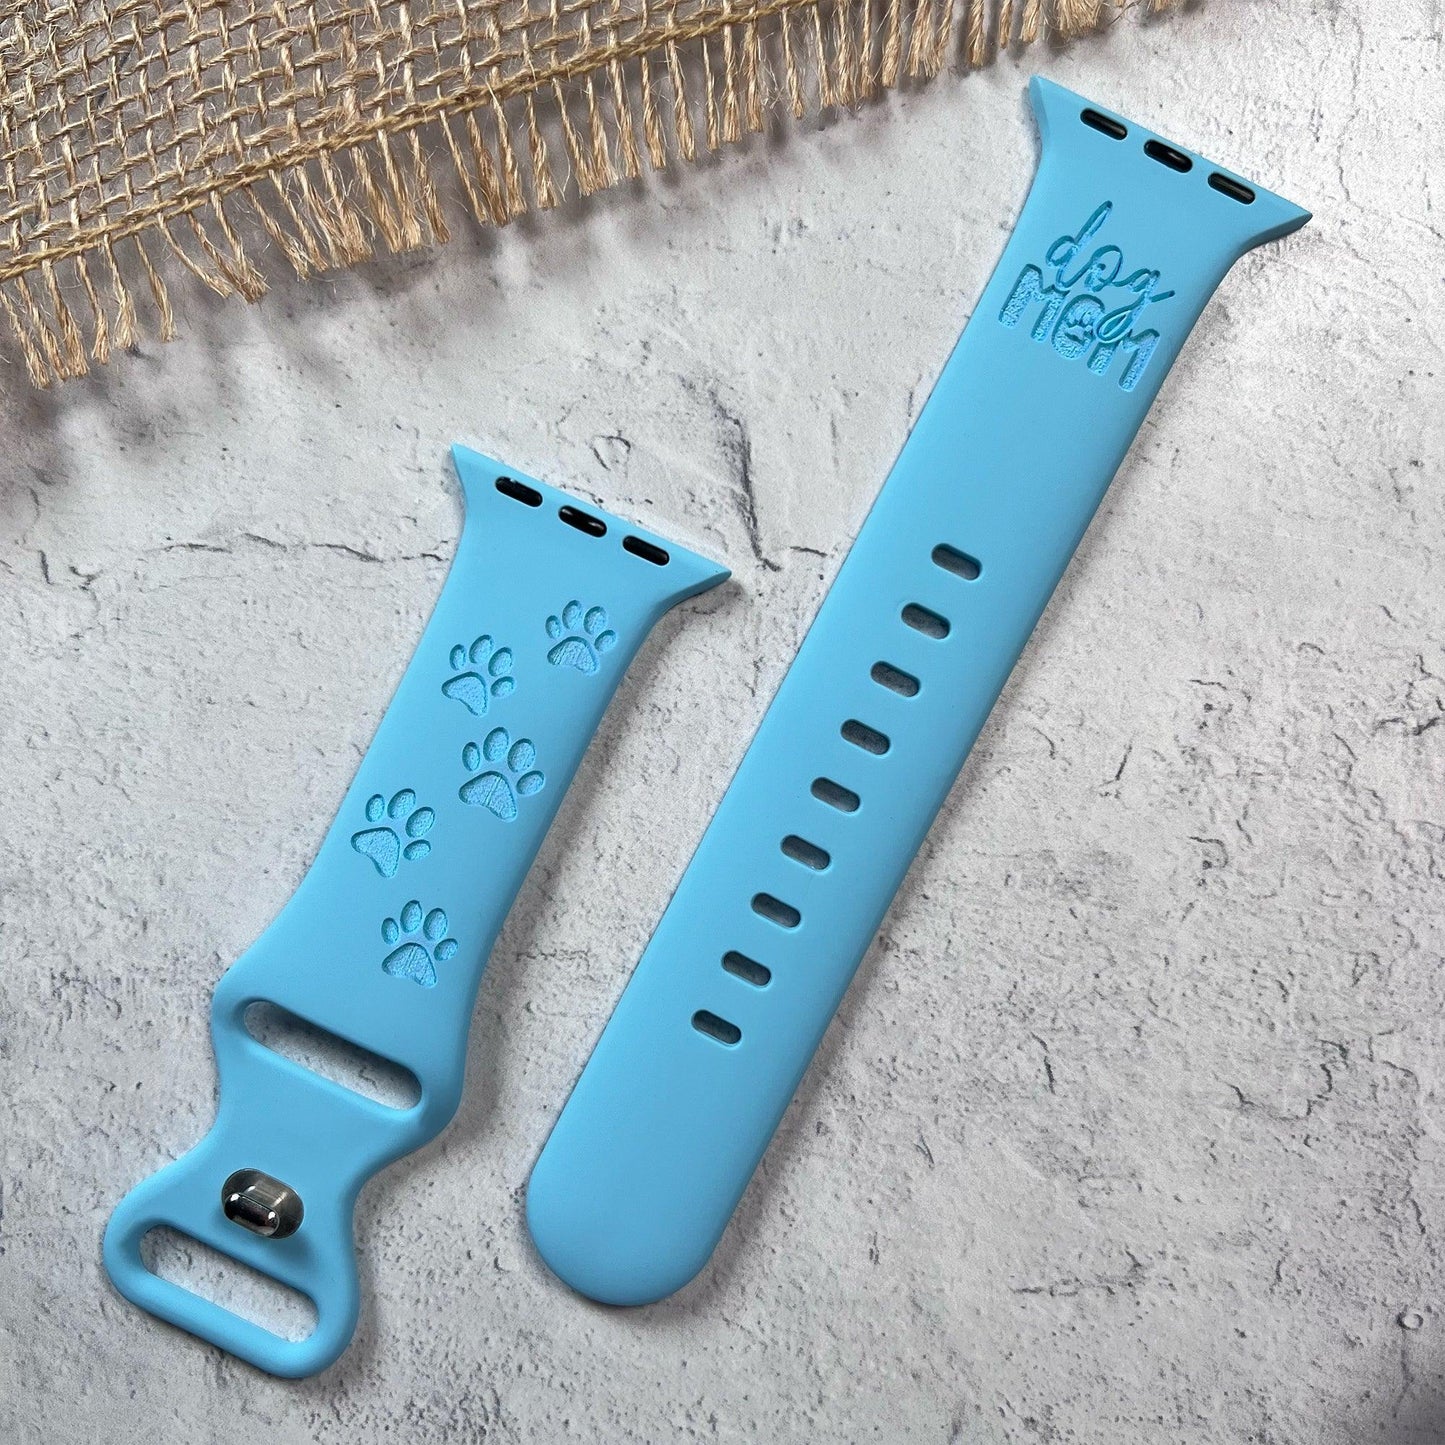 DOG - Engraved watchband new